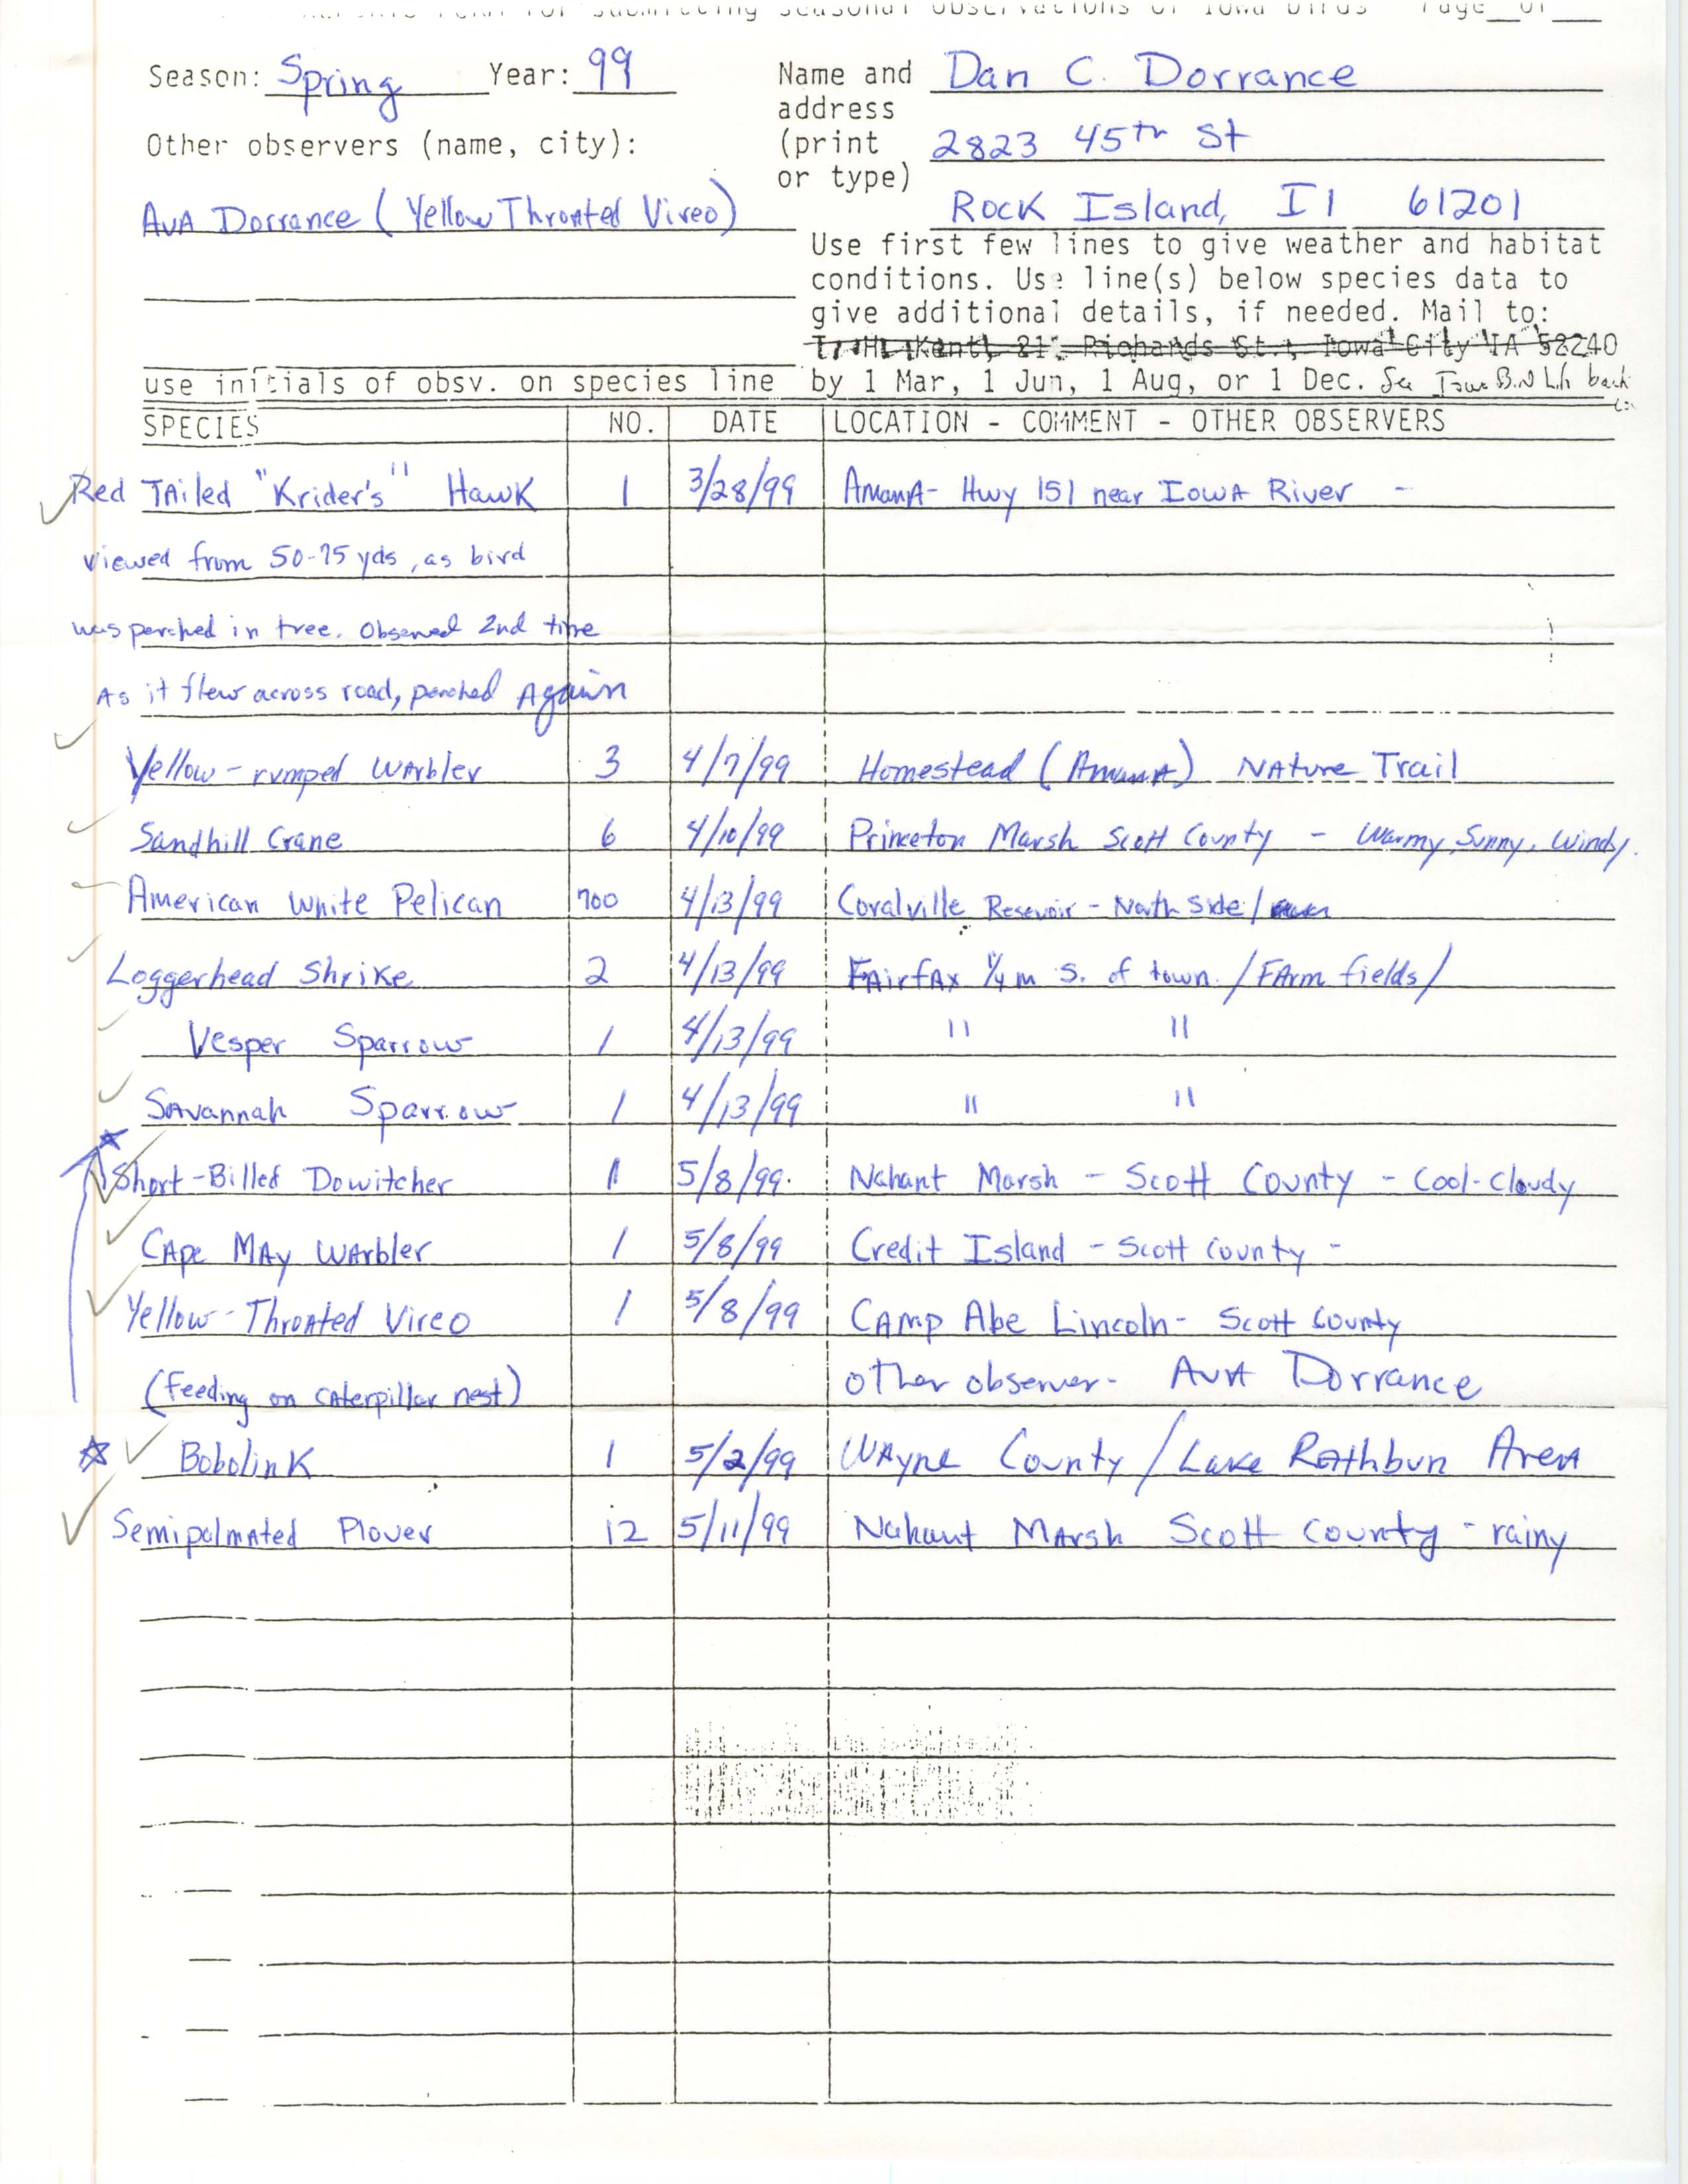 Field reports form for submitting seasonal observations of Iowa birds, Dan Dorrance, spring 1999